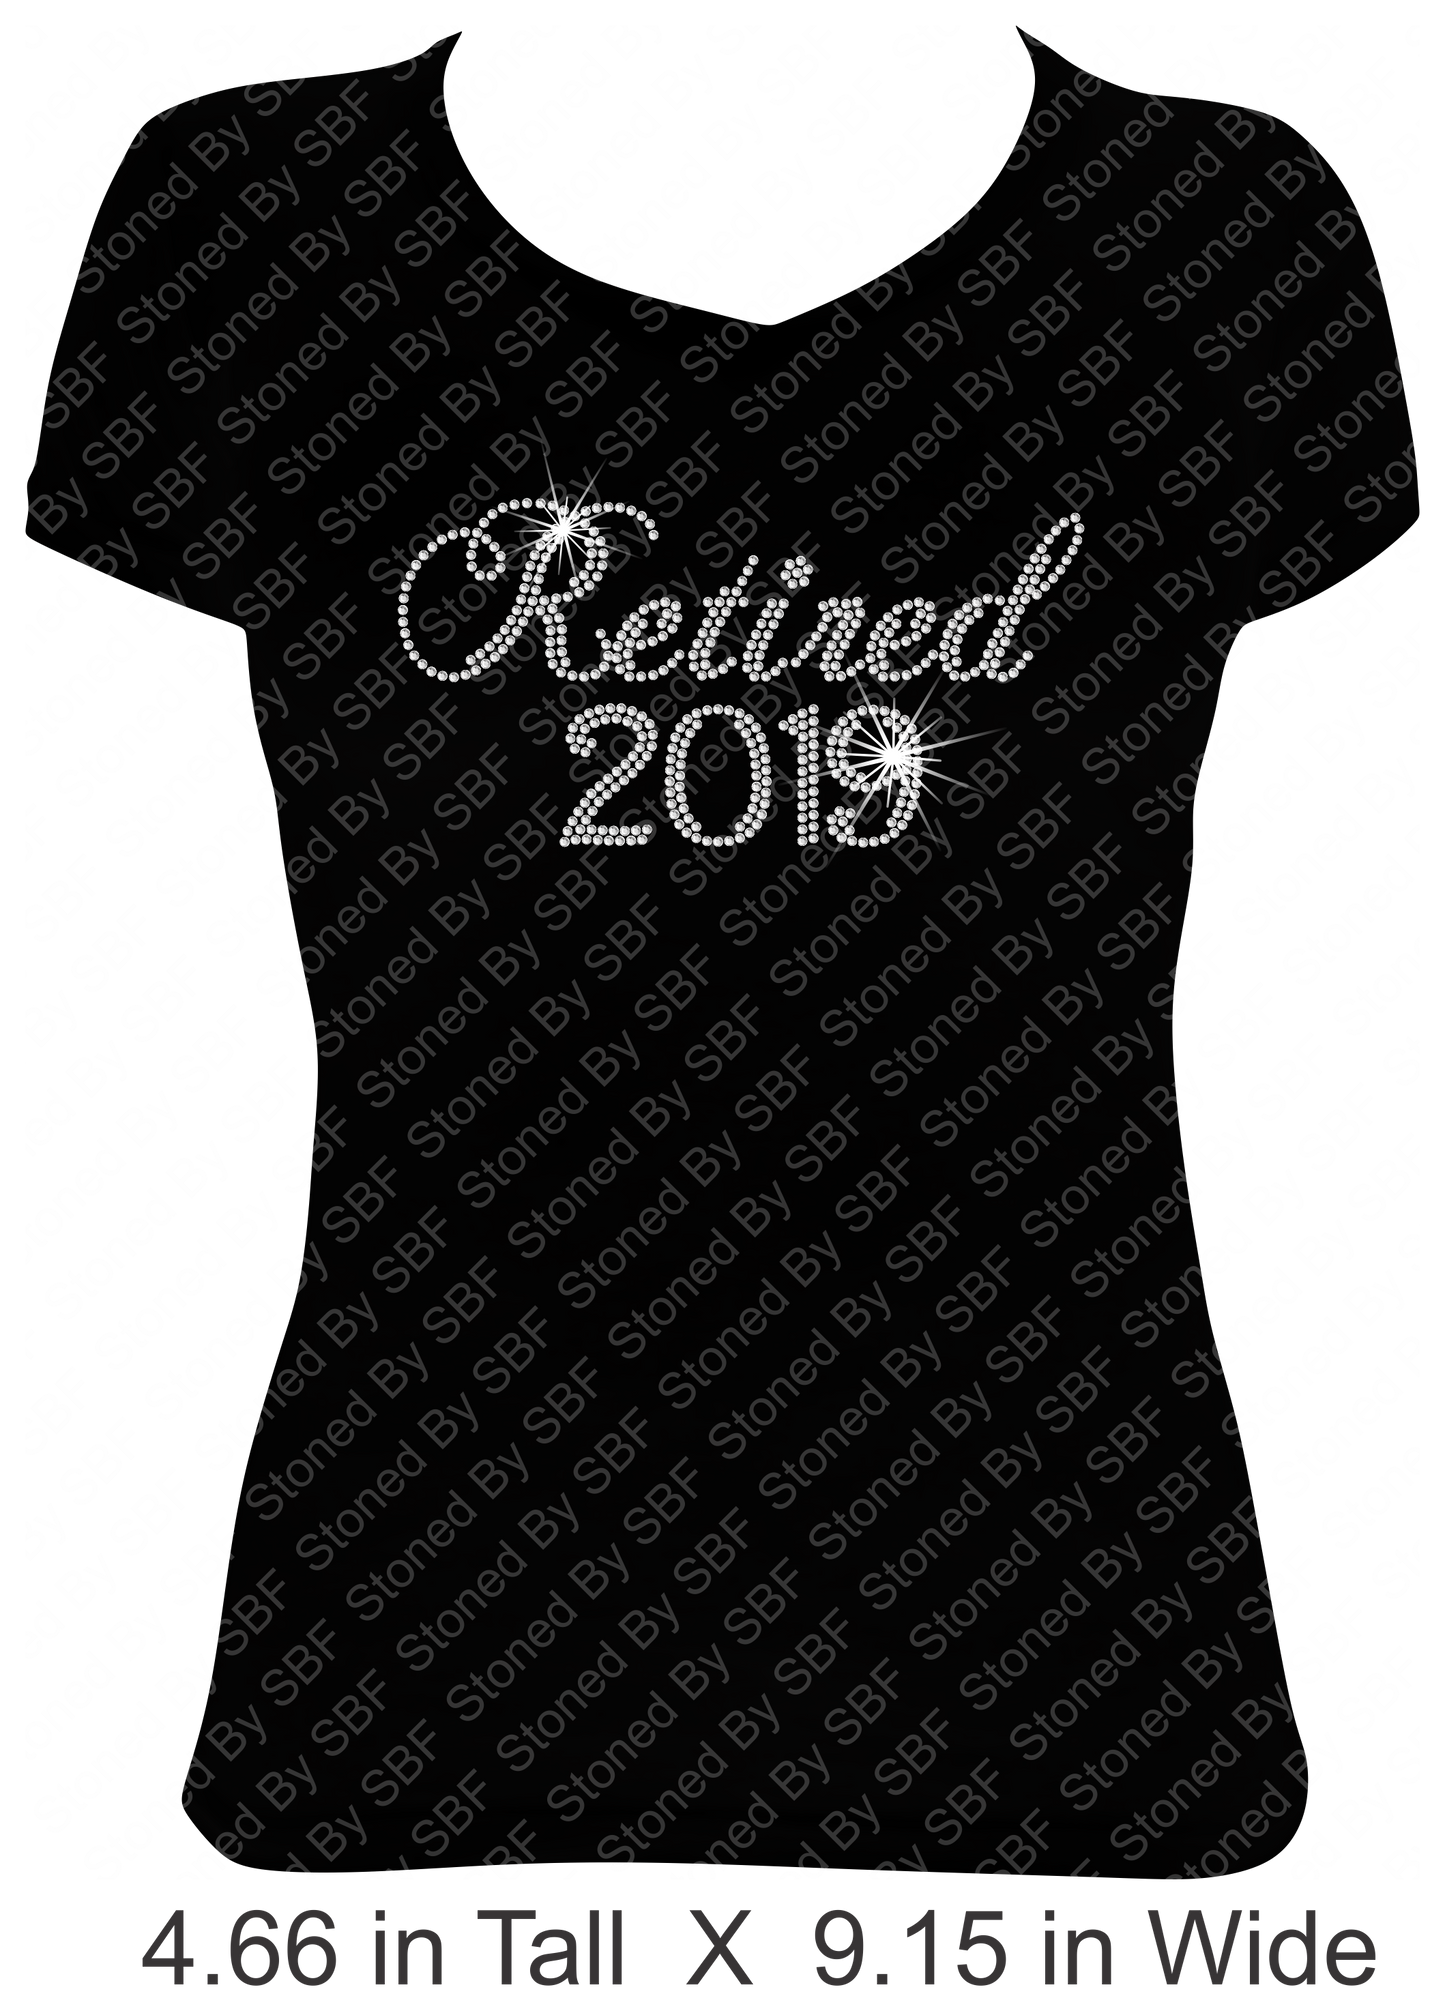 Retired With Year